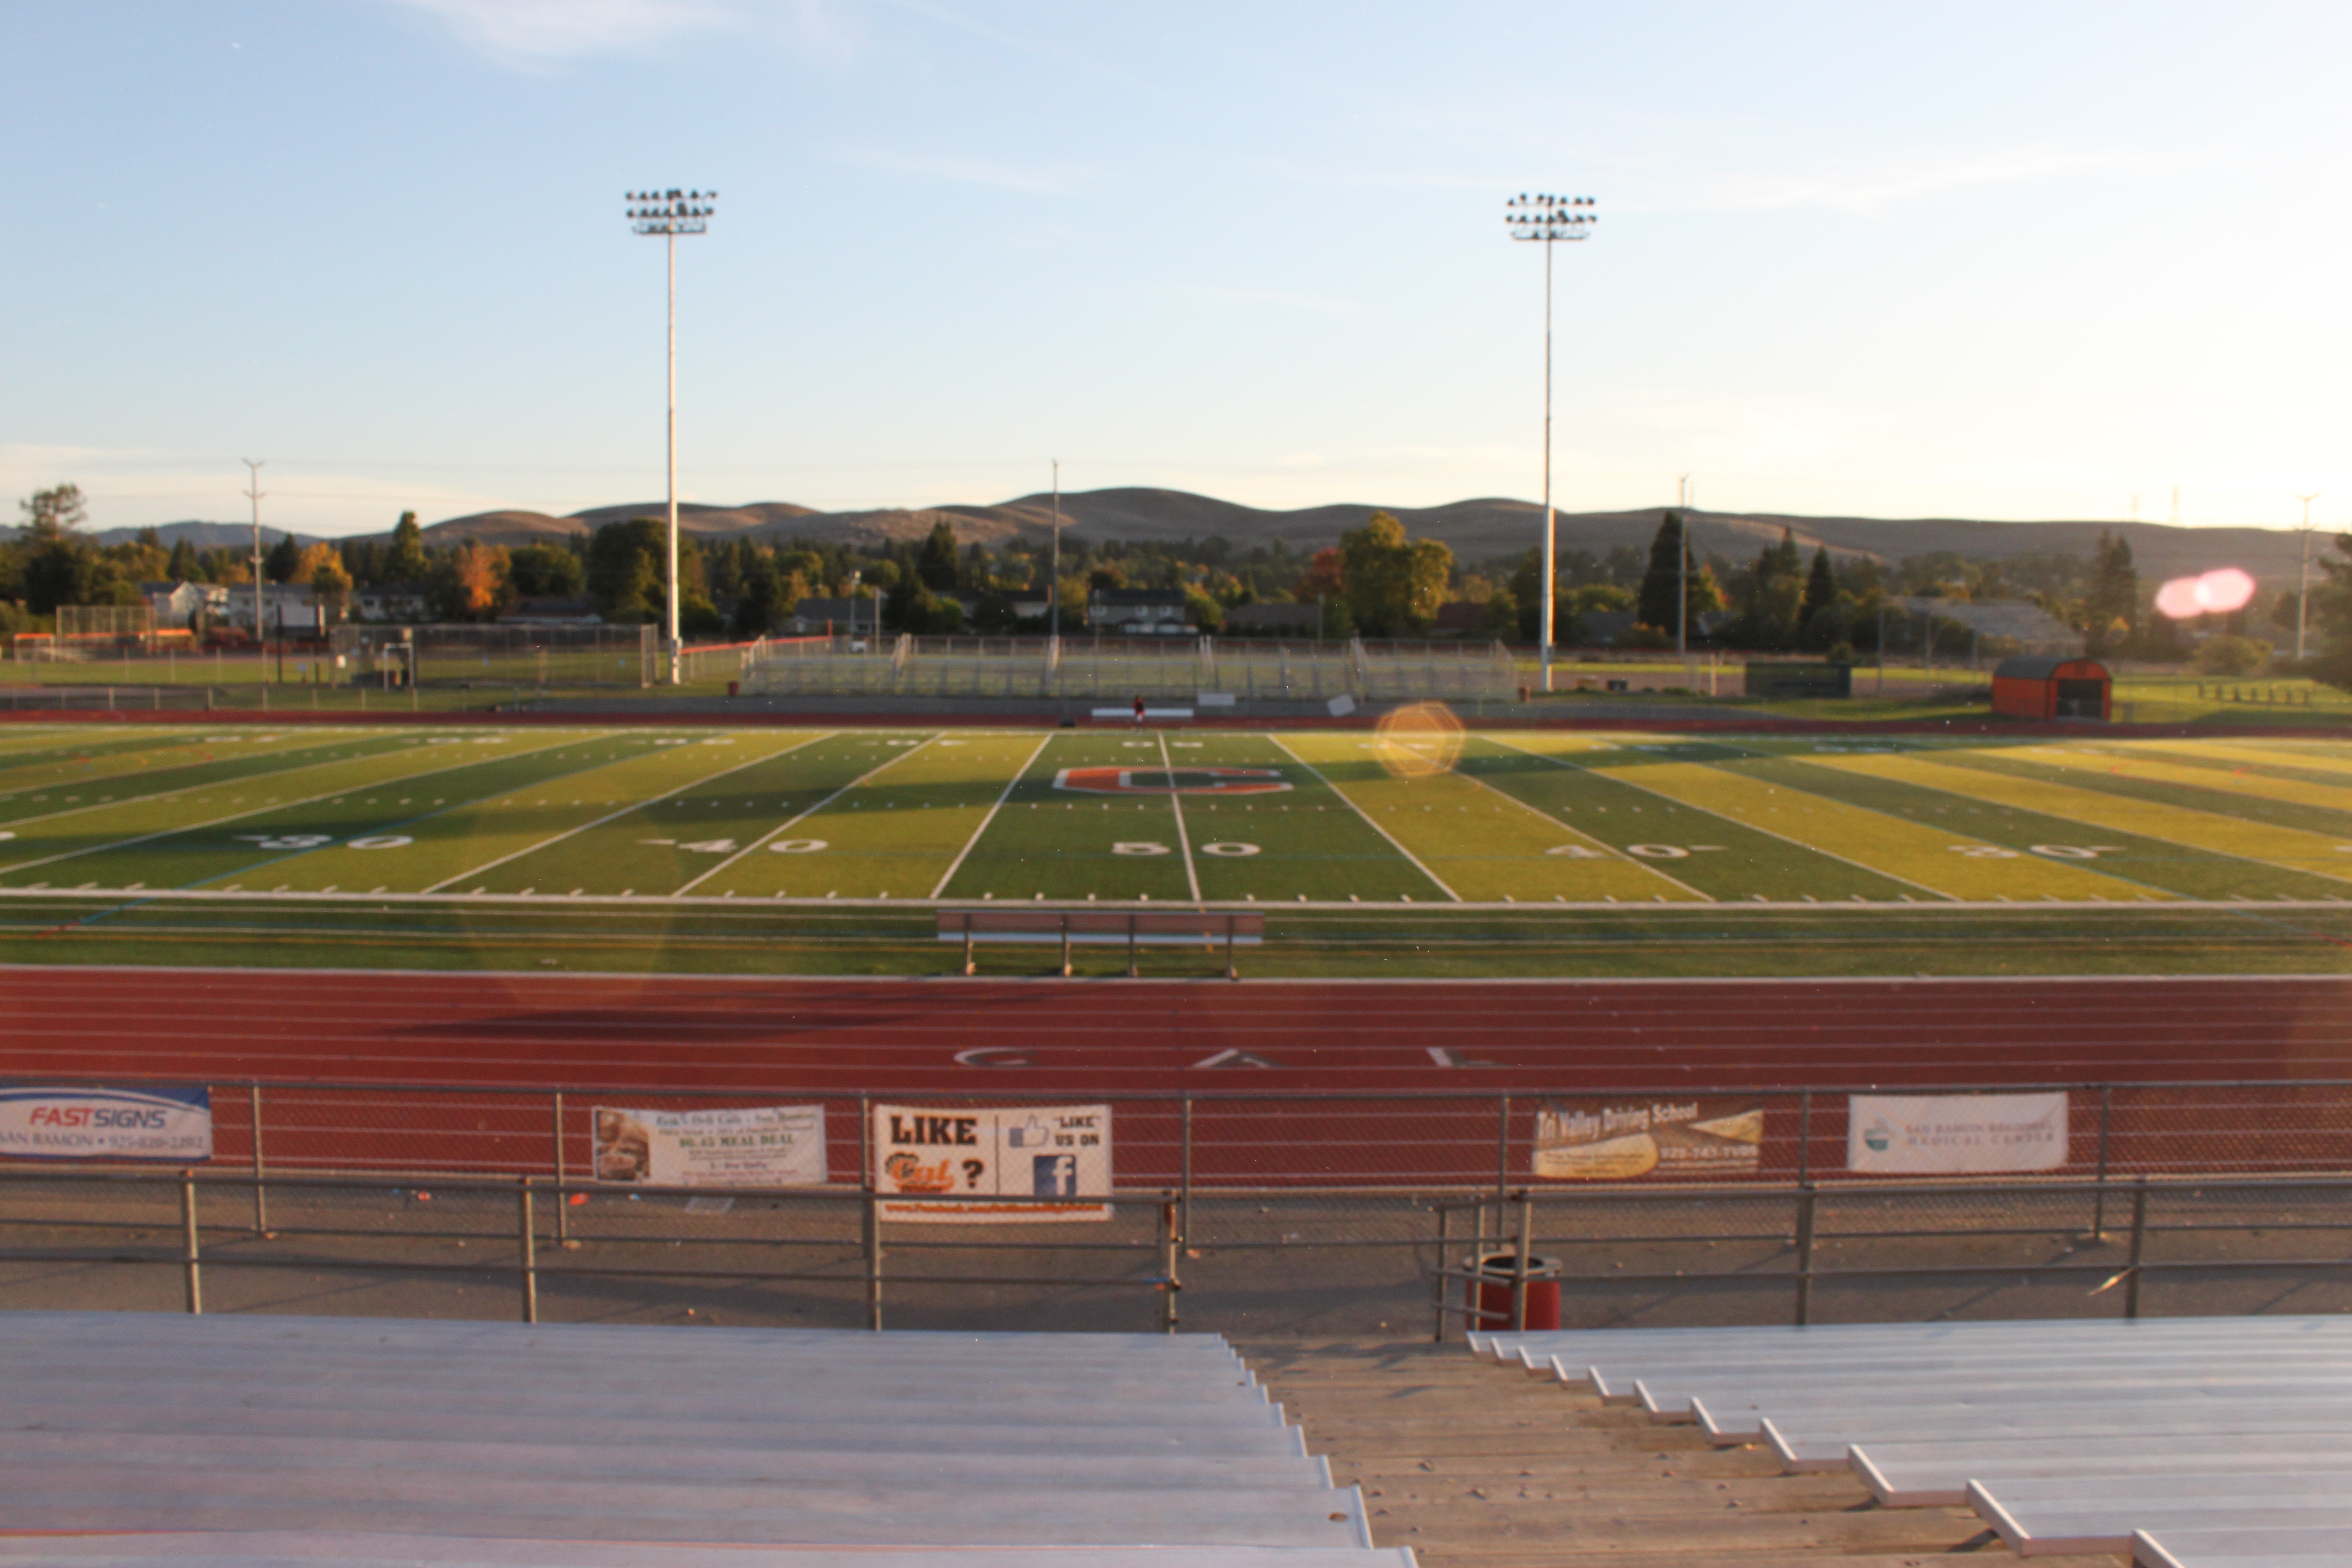 Home to Football, Soccer, Lacrosse, Track & Field.